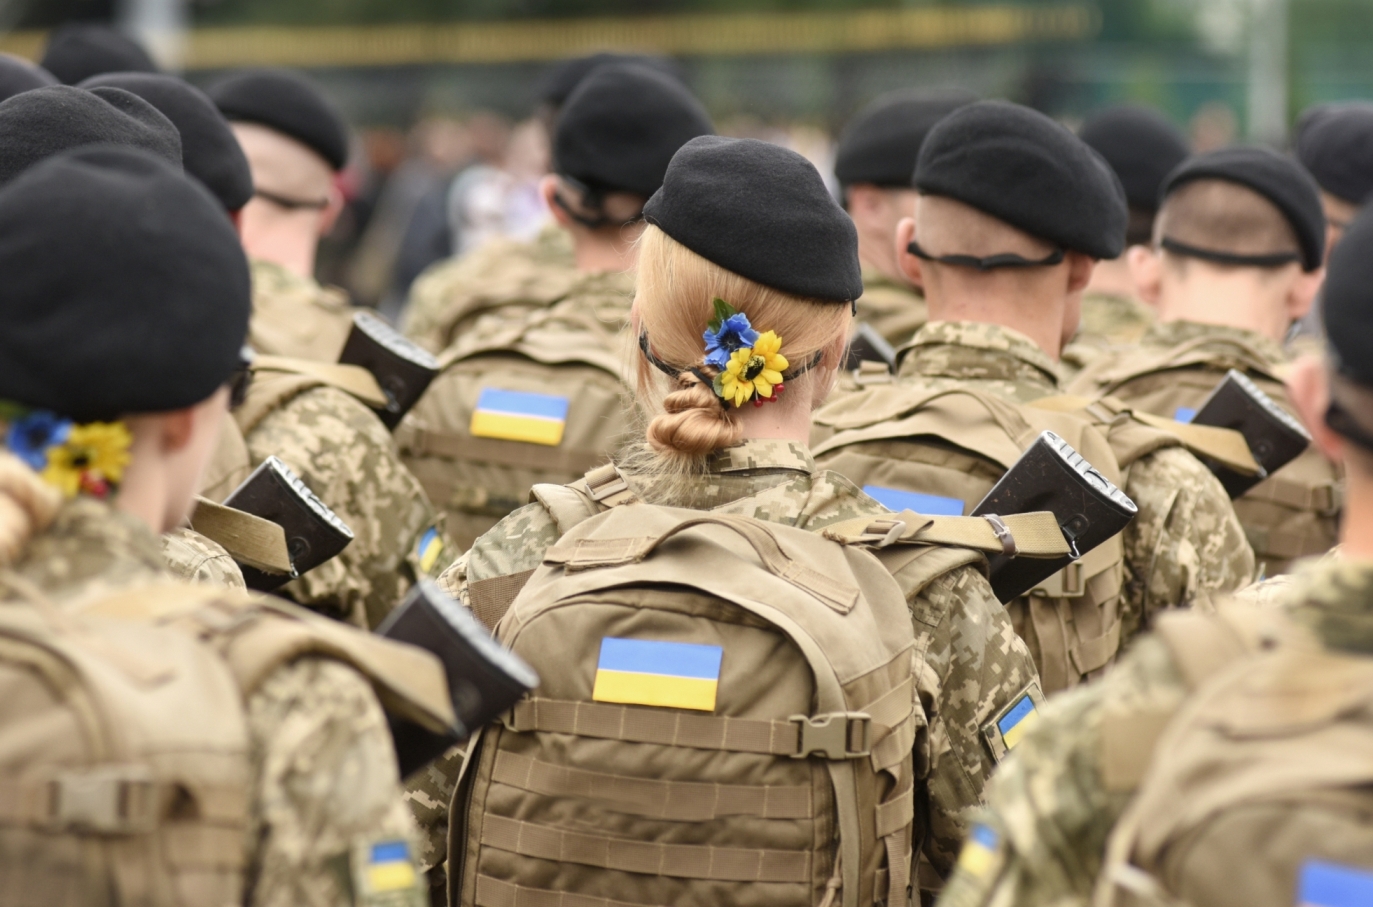 The Ukrainian Nation, willing to fight